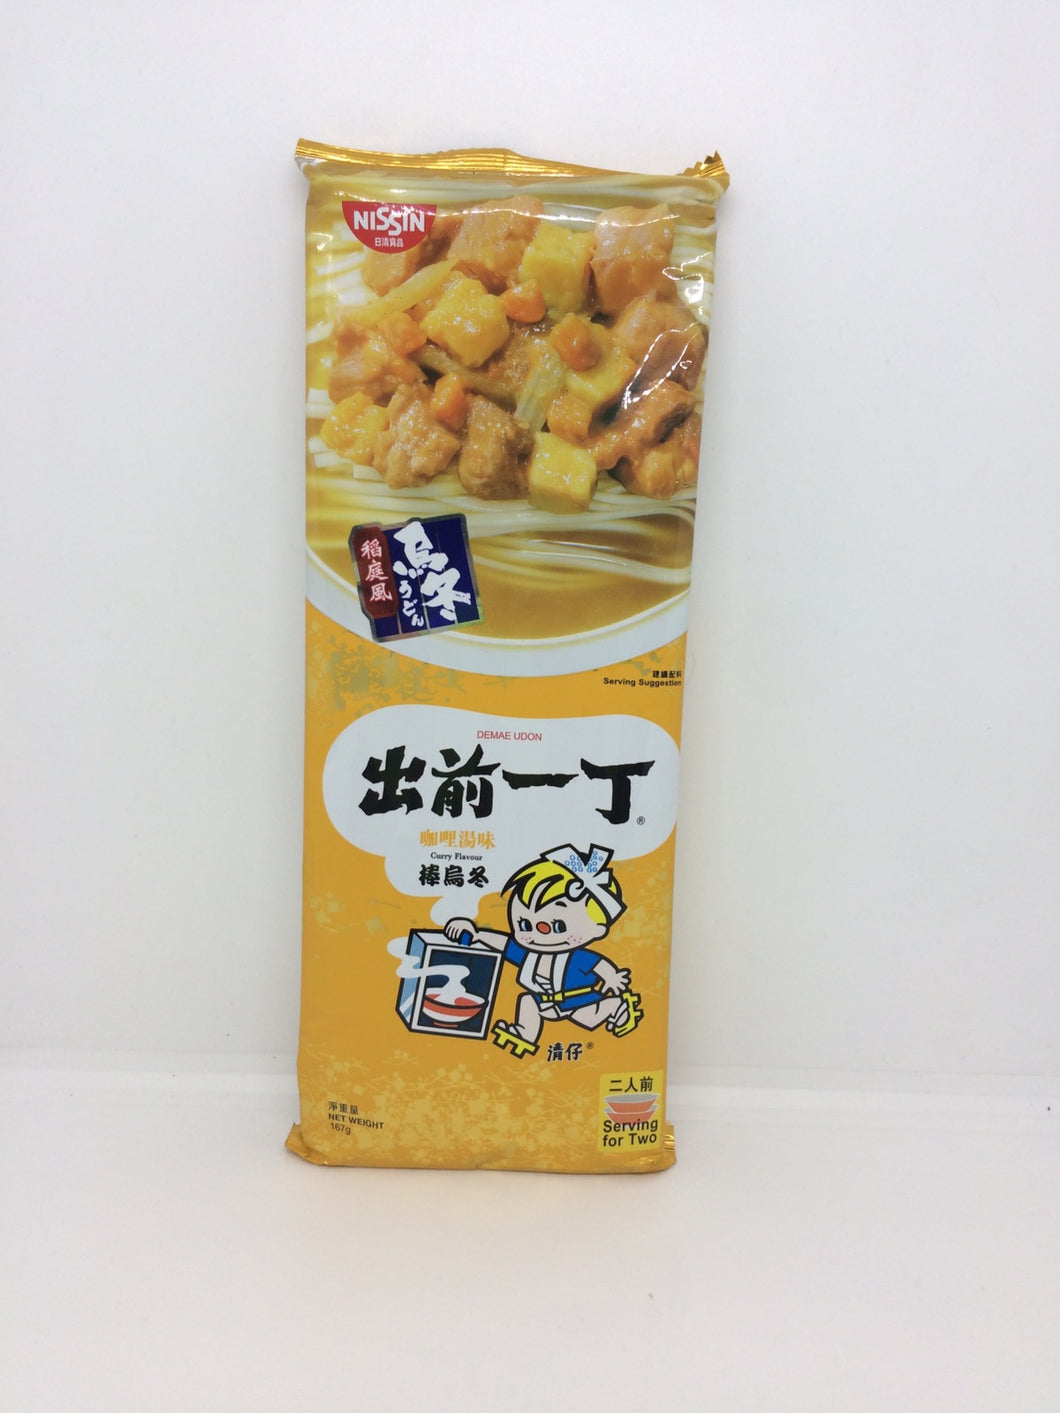 Nissin Demae Udon Curry